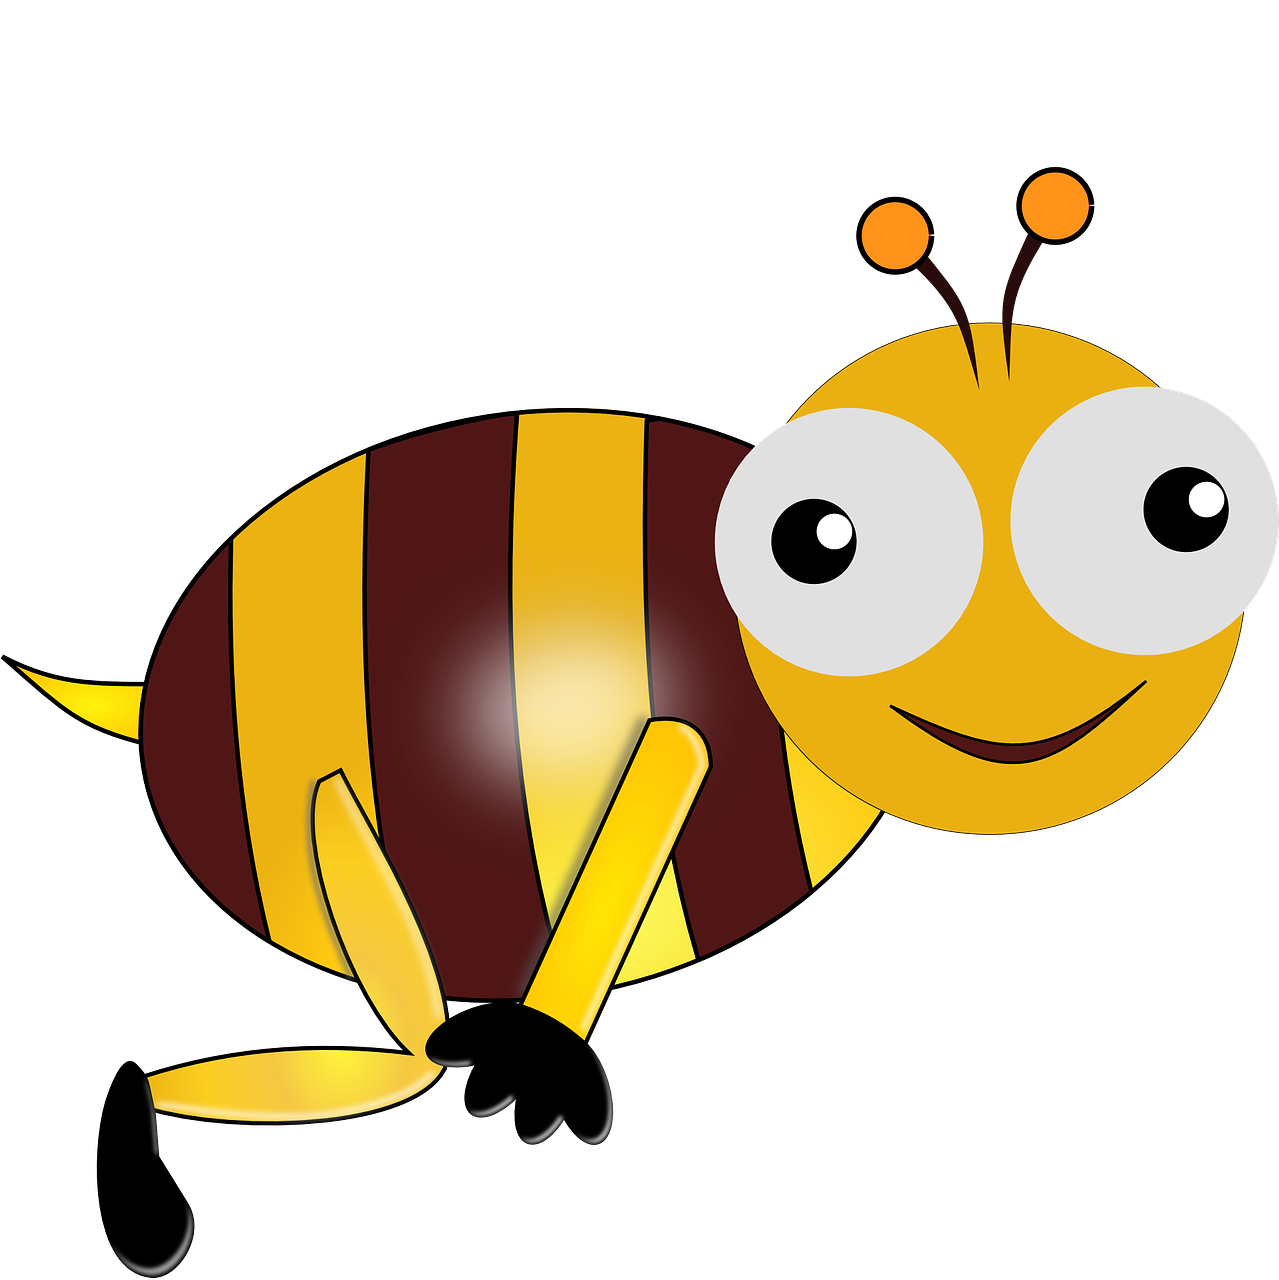 Bee With Funny Eyes - Bumble Bee Animation (1279x1280)